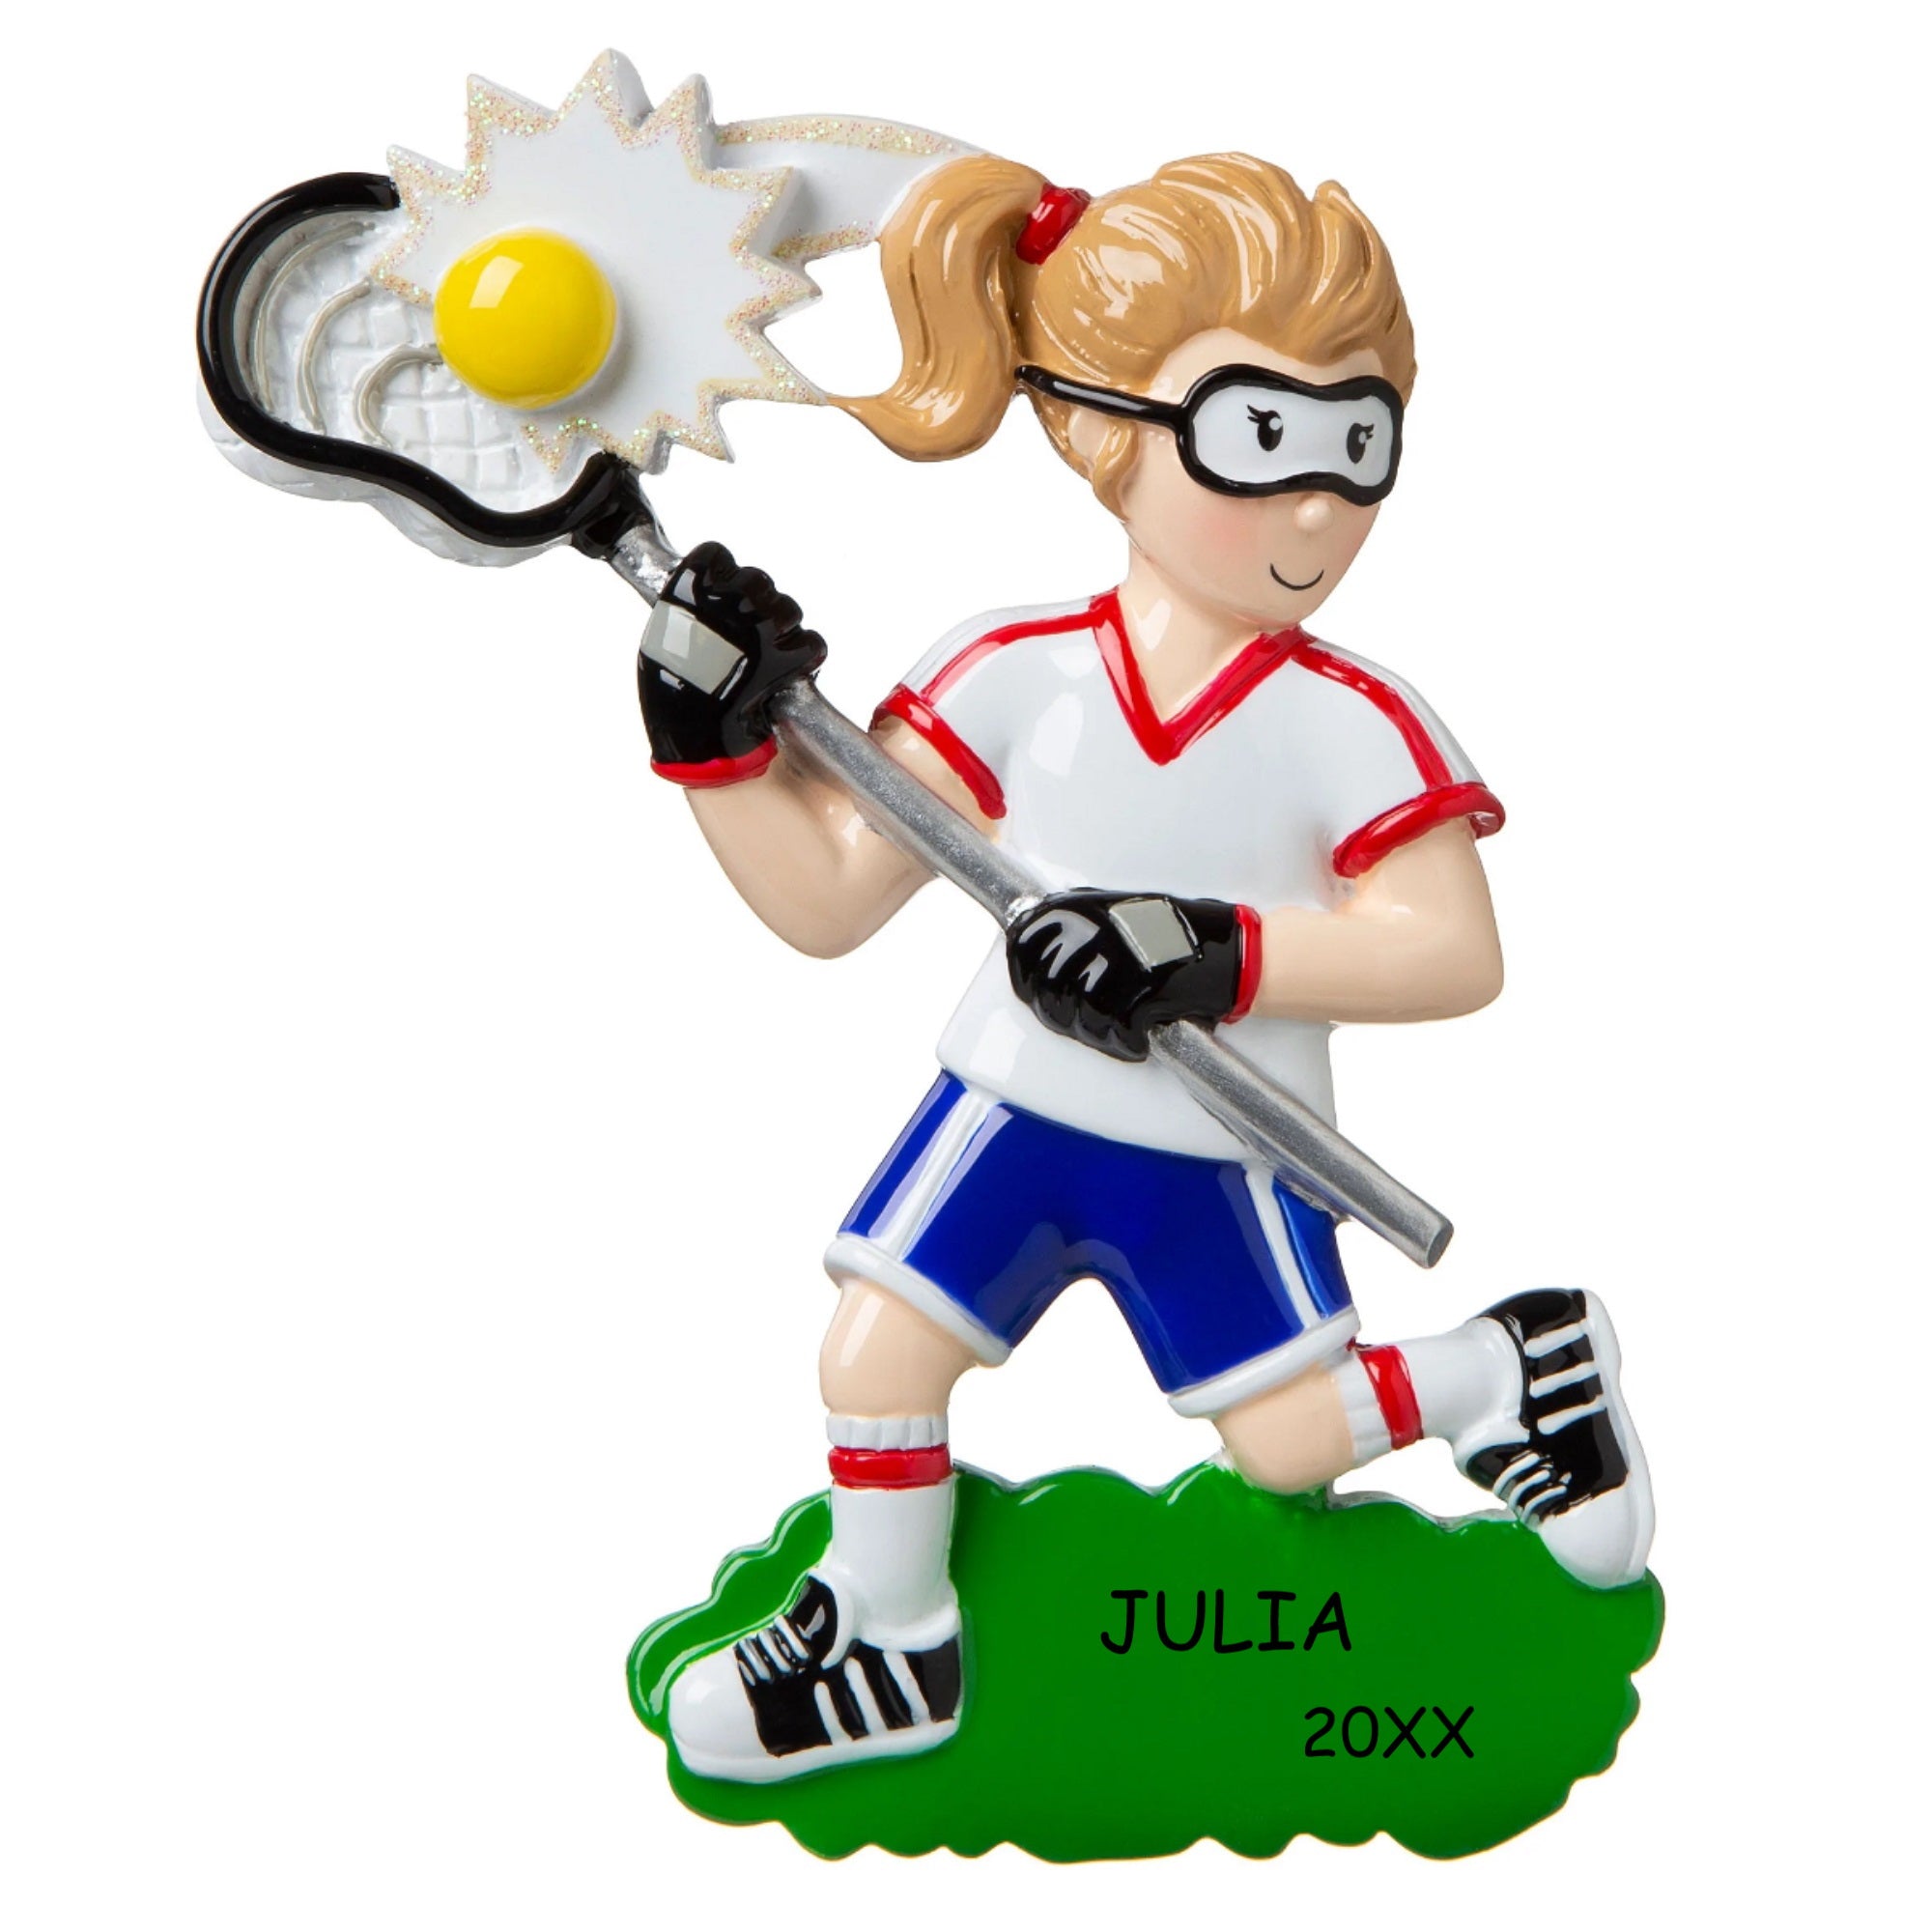 Personalized Lacrosse Sports Christmas Ornament - Girls